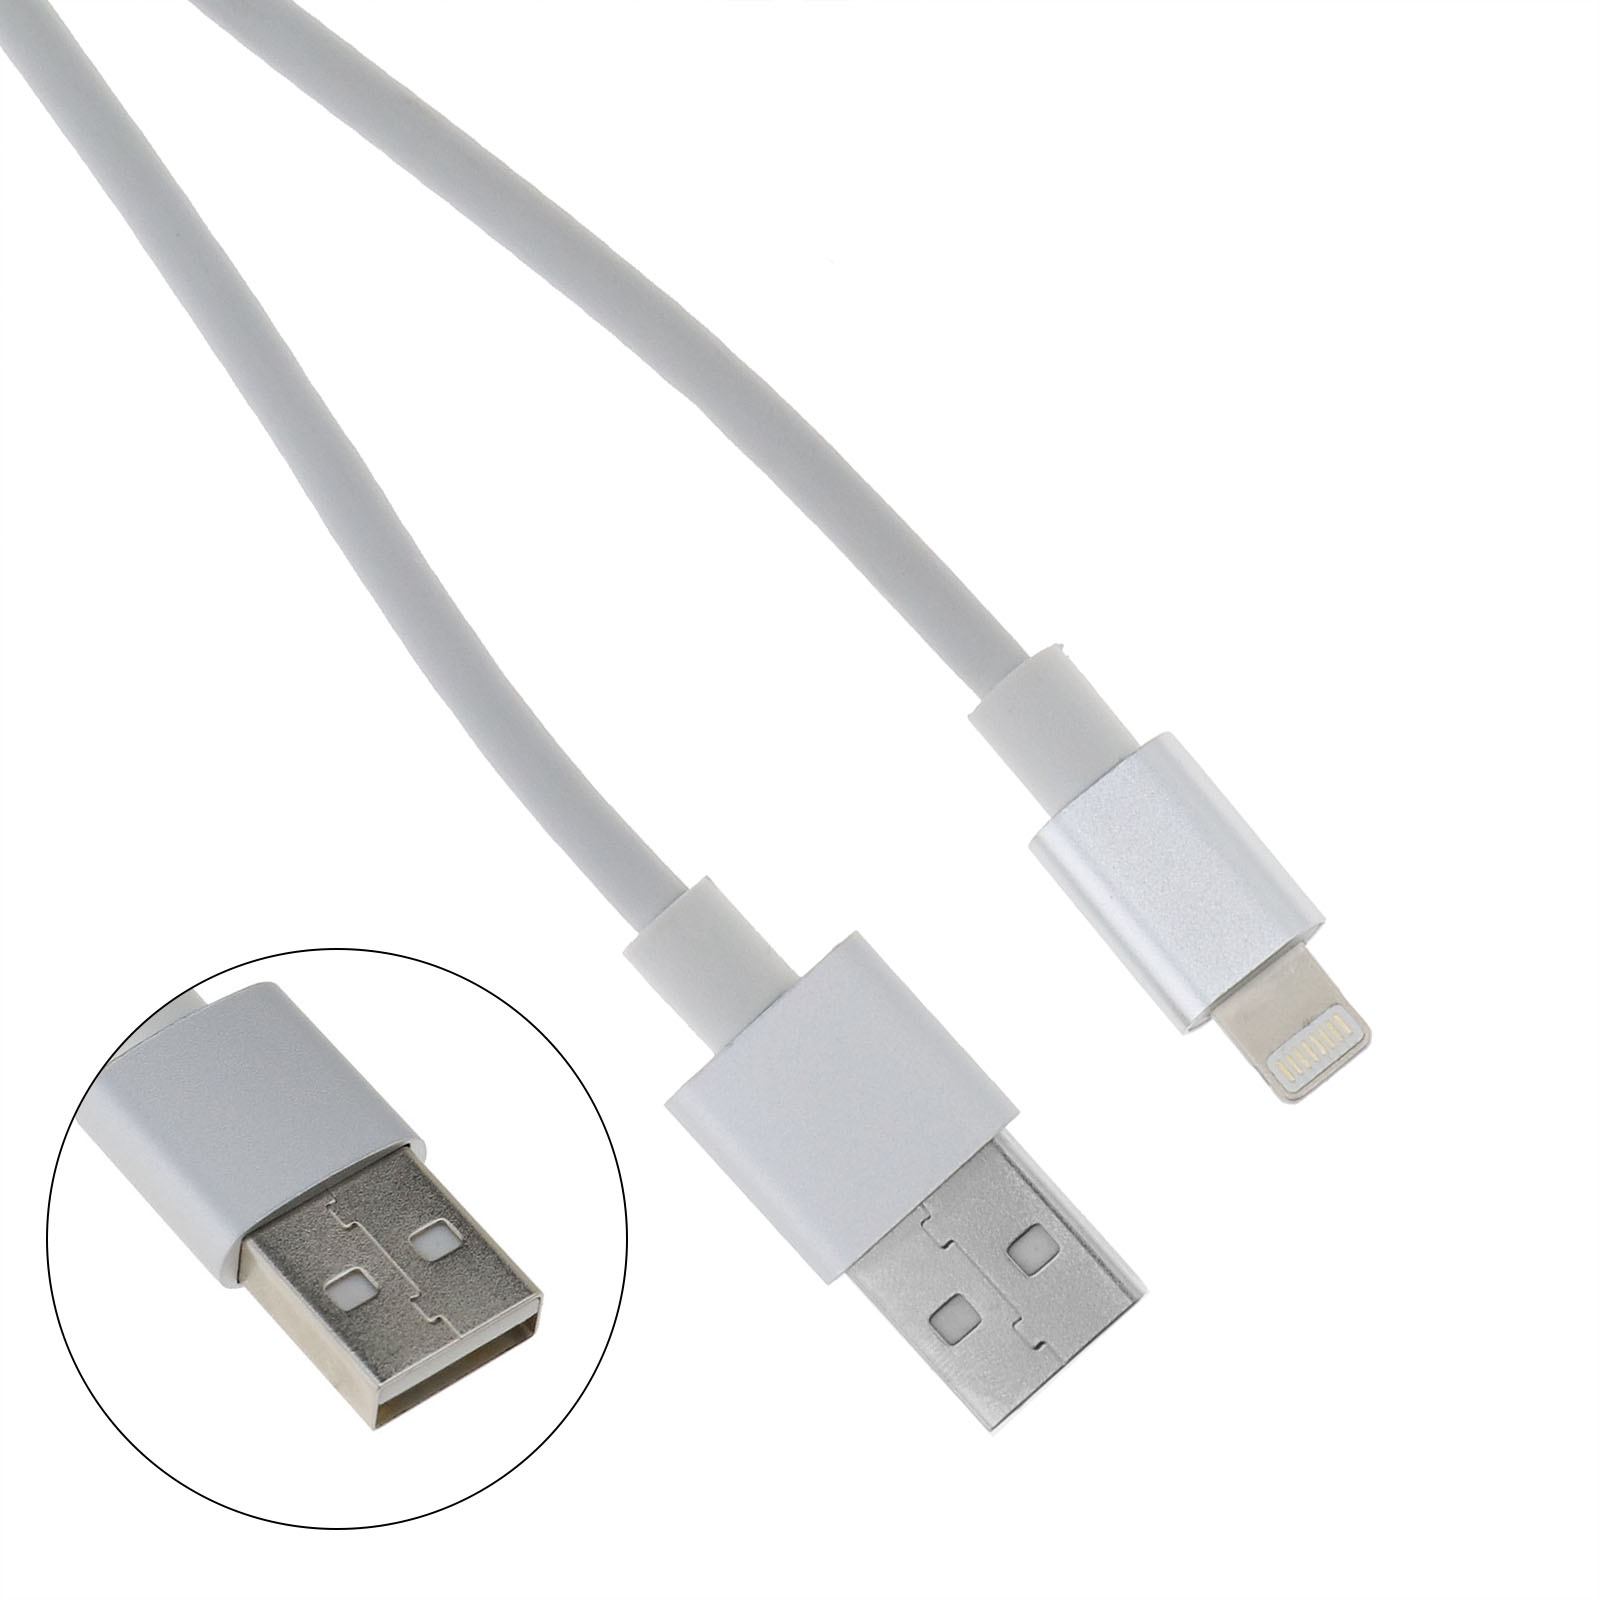 Mini USB 8 pin Lightning to HDMI Cable Adapter HDTV AV 2M for iPhone 6S ...